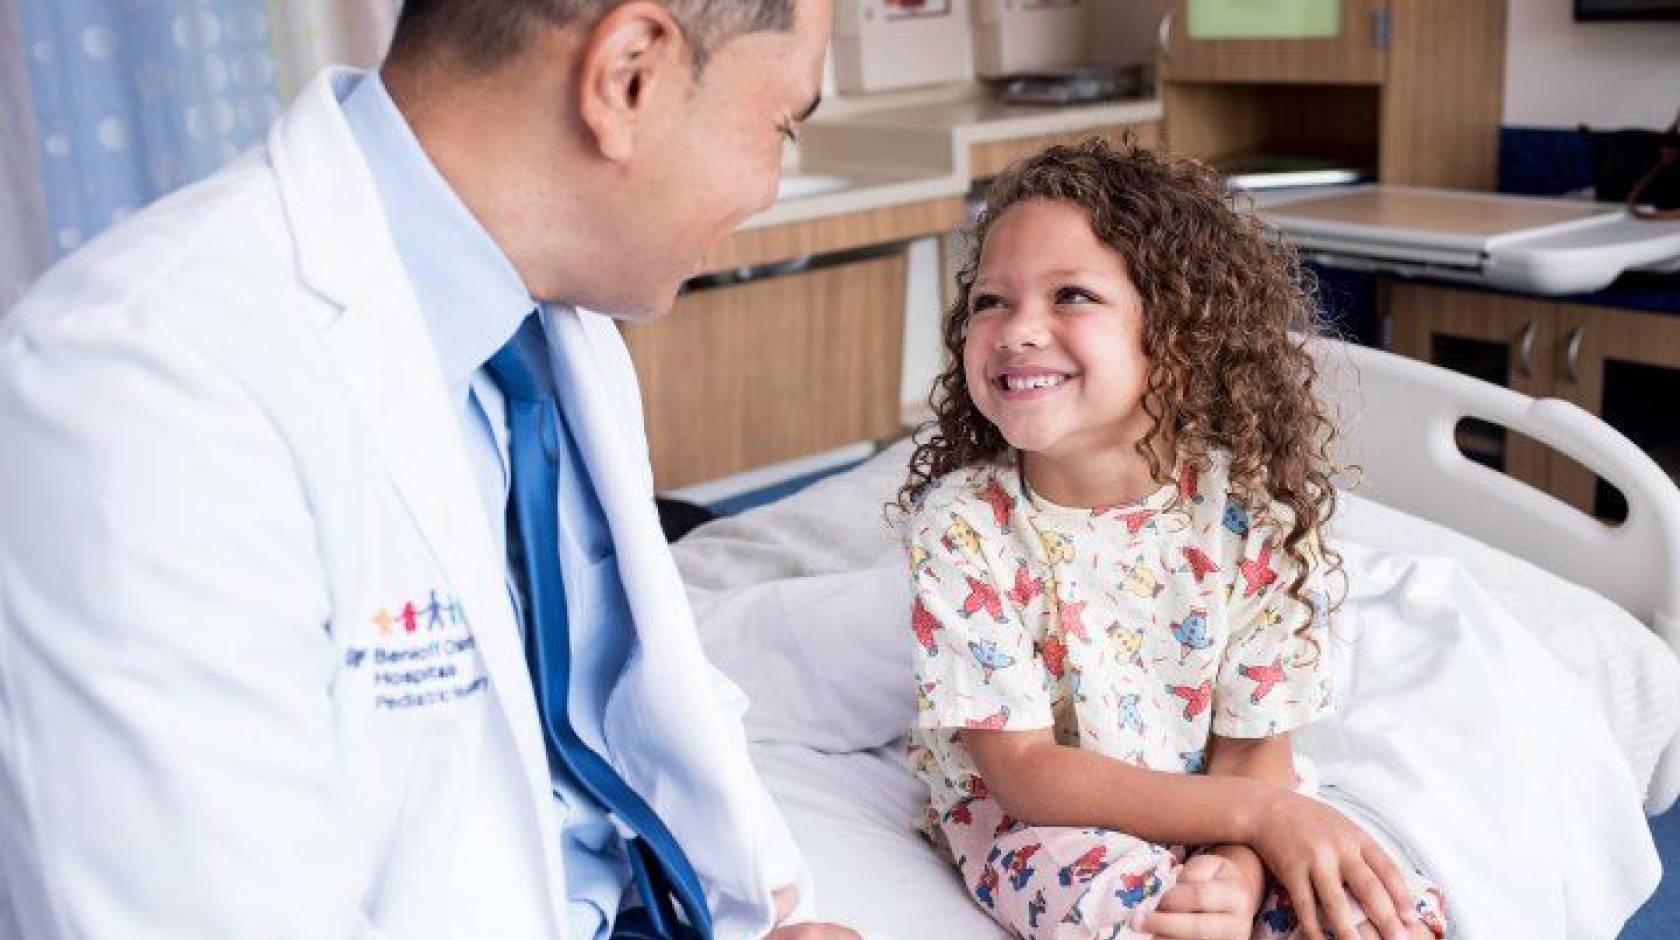 Kurtis Auguste, MD, a pediatric neurosurgeon, talks with a child in the Pediatric Brain Center at the UCSF Benioff Children’s Hospital.